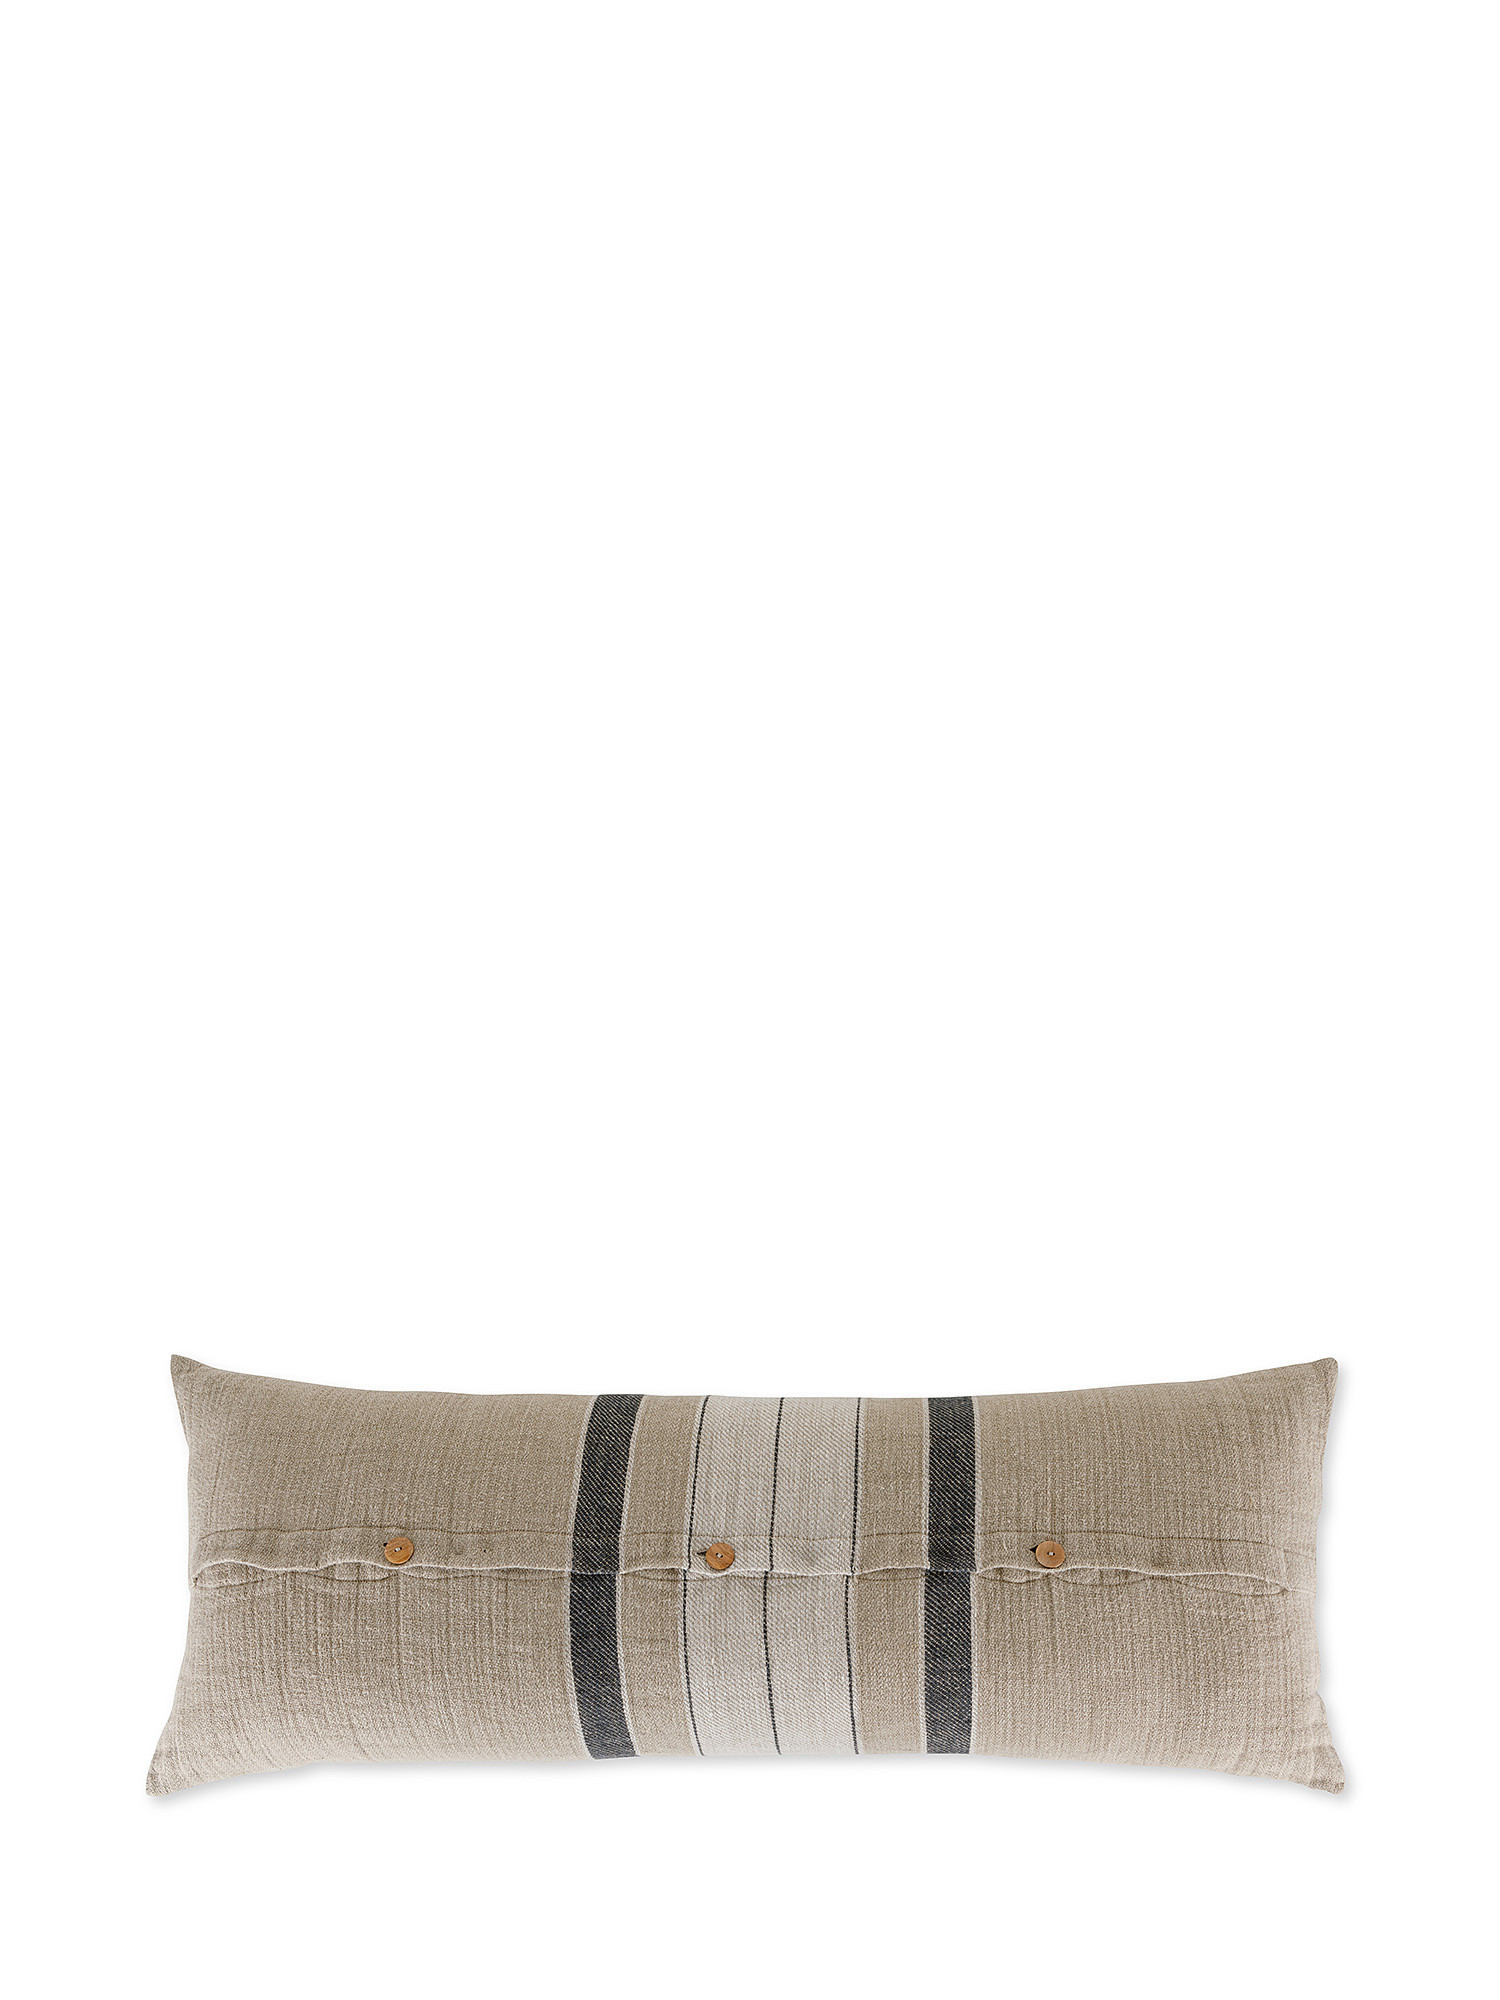 Yarn-dyed pure linen cushion 35x90cm, Beige, large image number 1